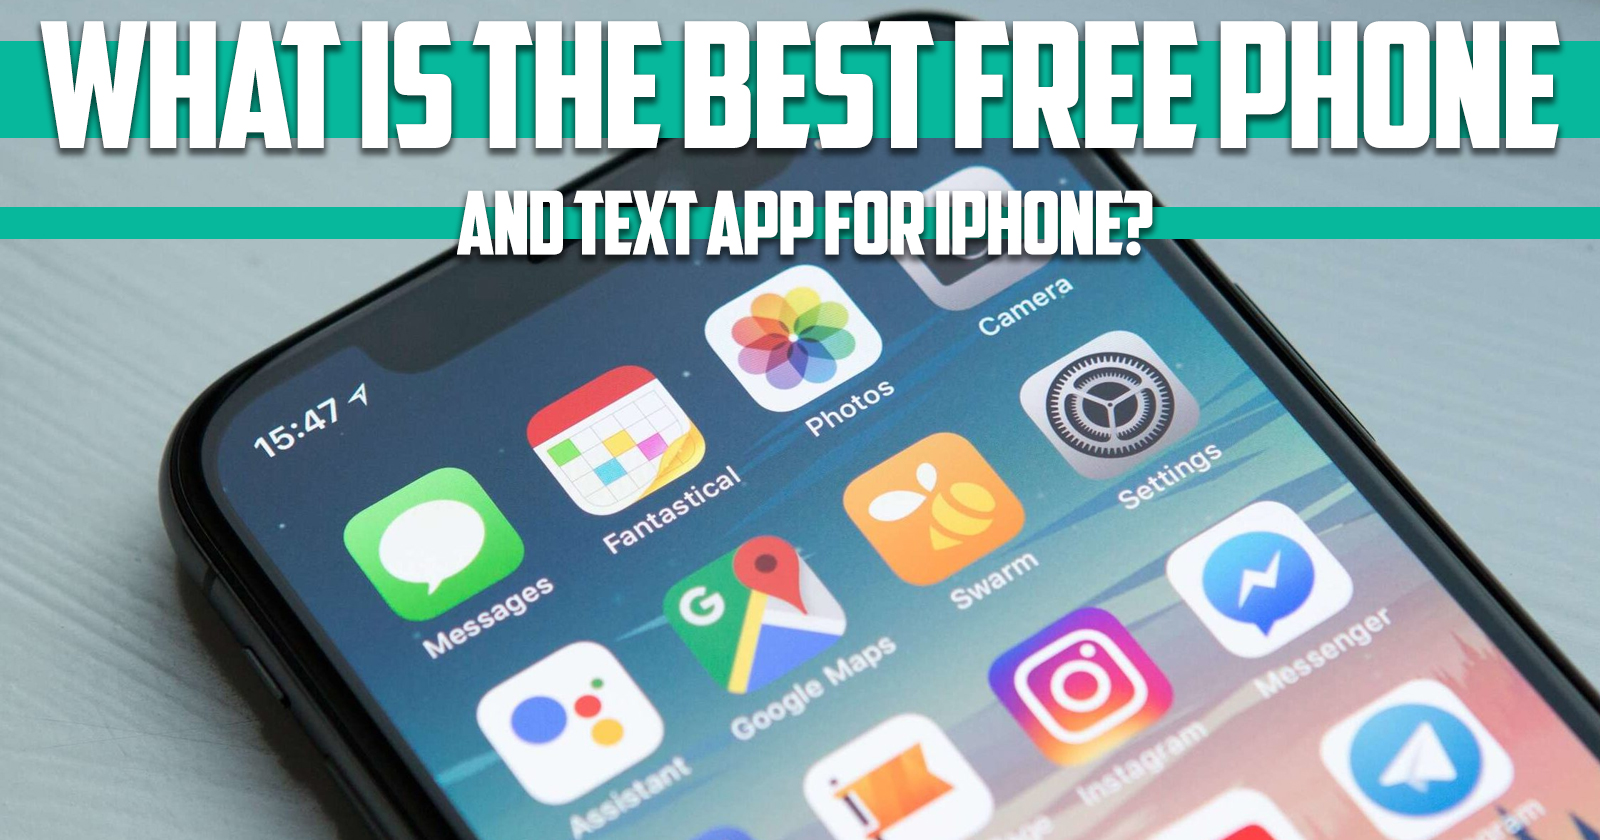 what is the best free phone and text app for iPhone 2022?